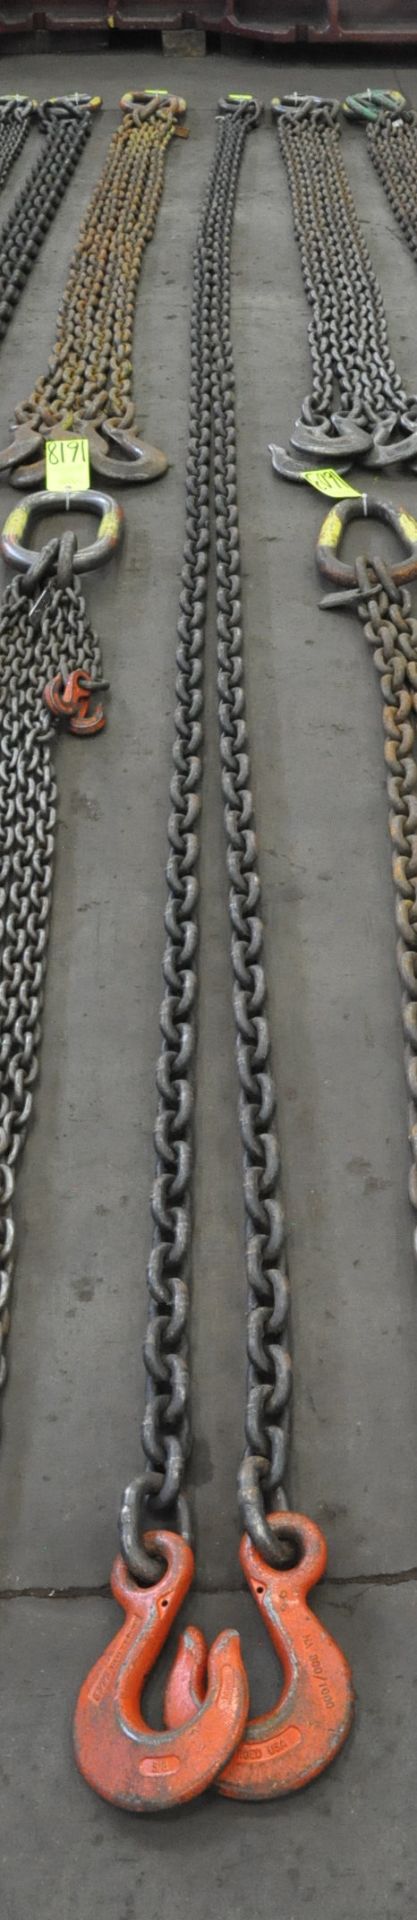 5/8" Link x 18' 6" Long 2-Hook Chain Sling, Cert Tag, (G-23), (Yellow Tag) - Image 2 of 2